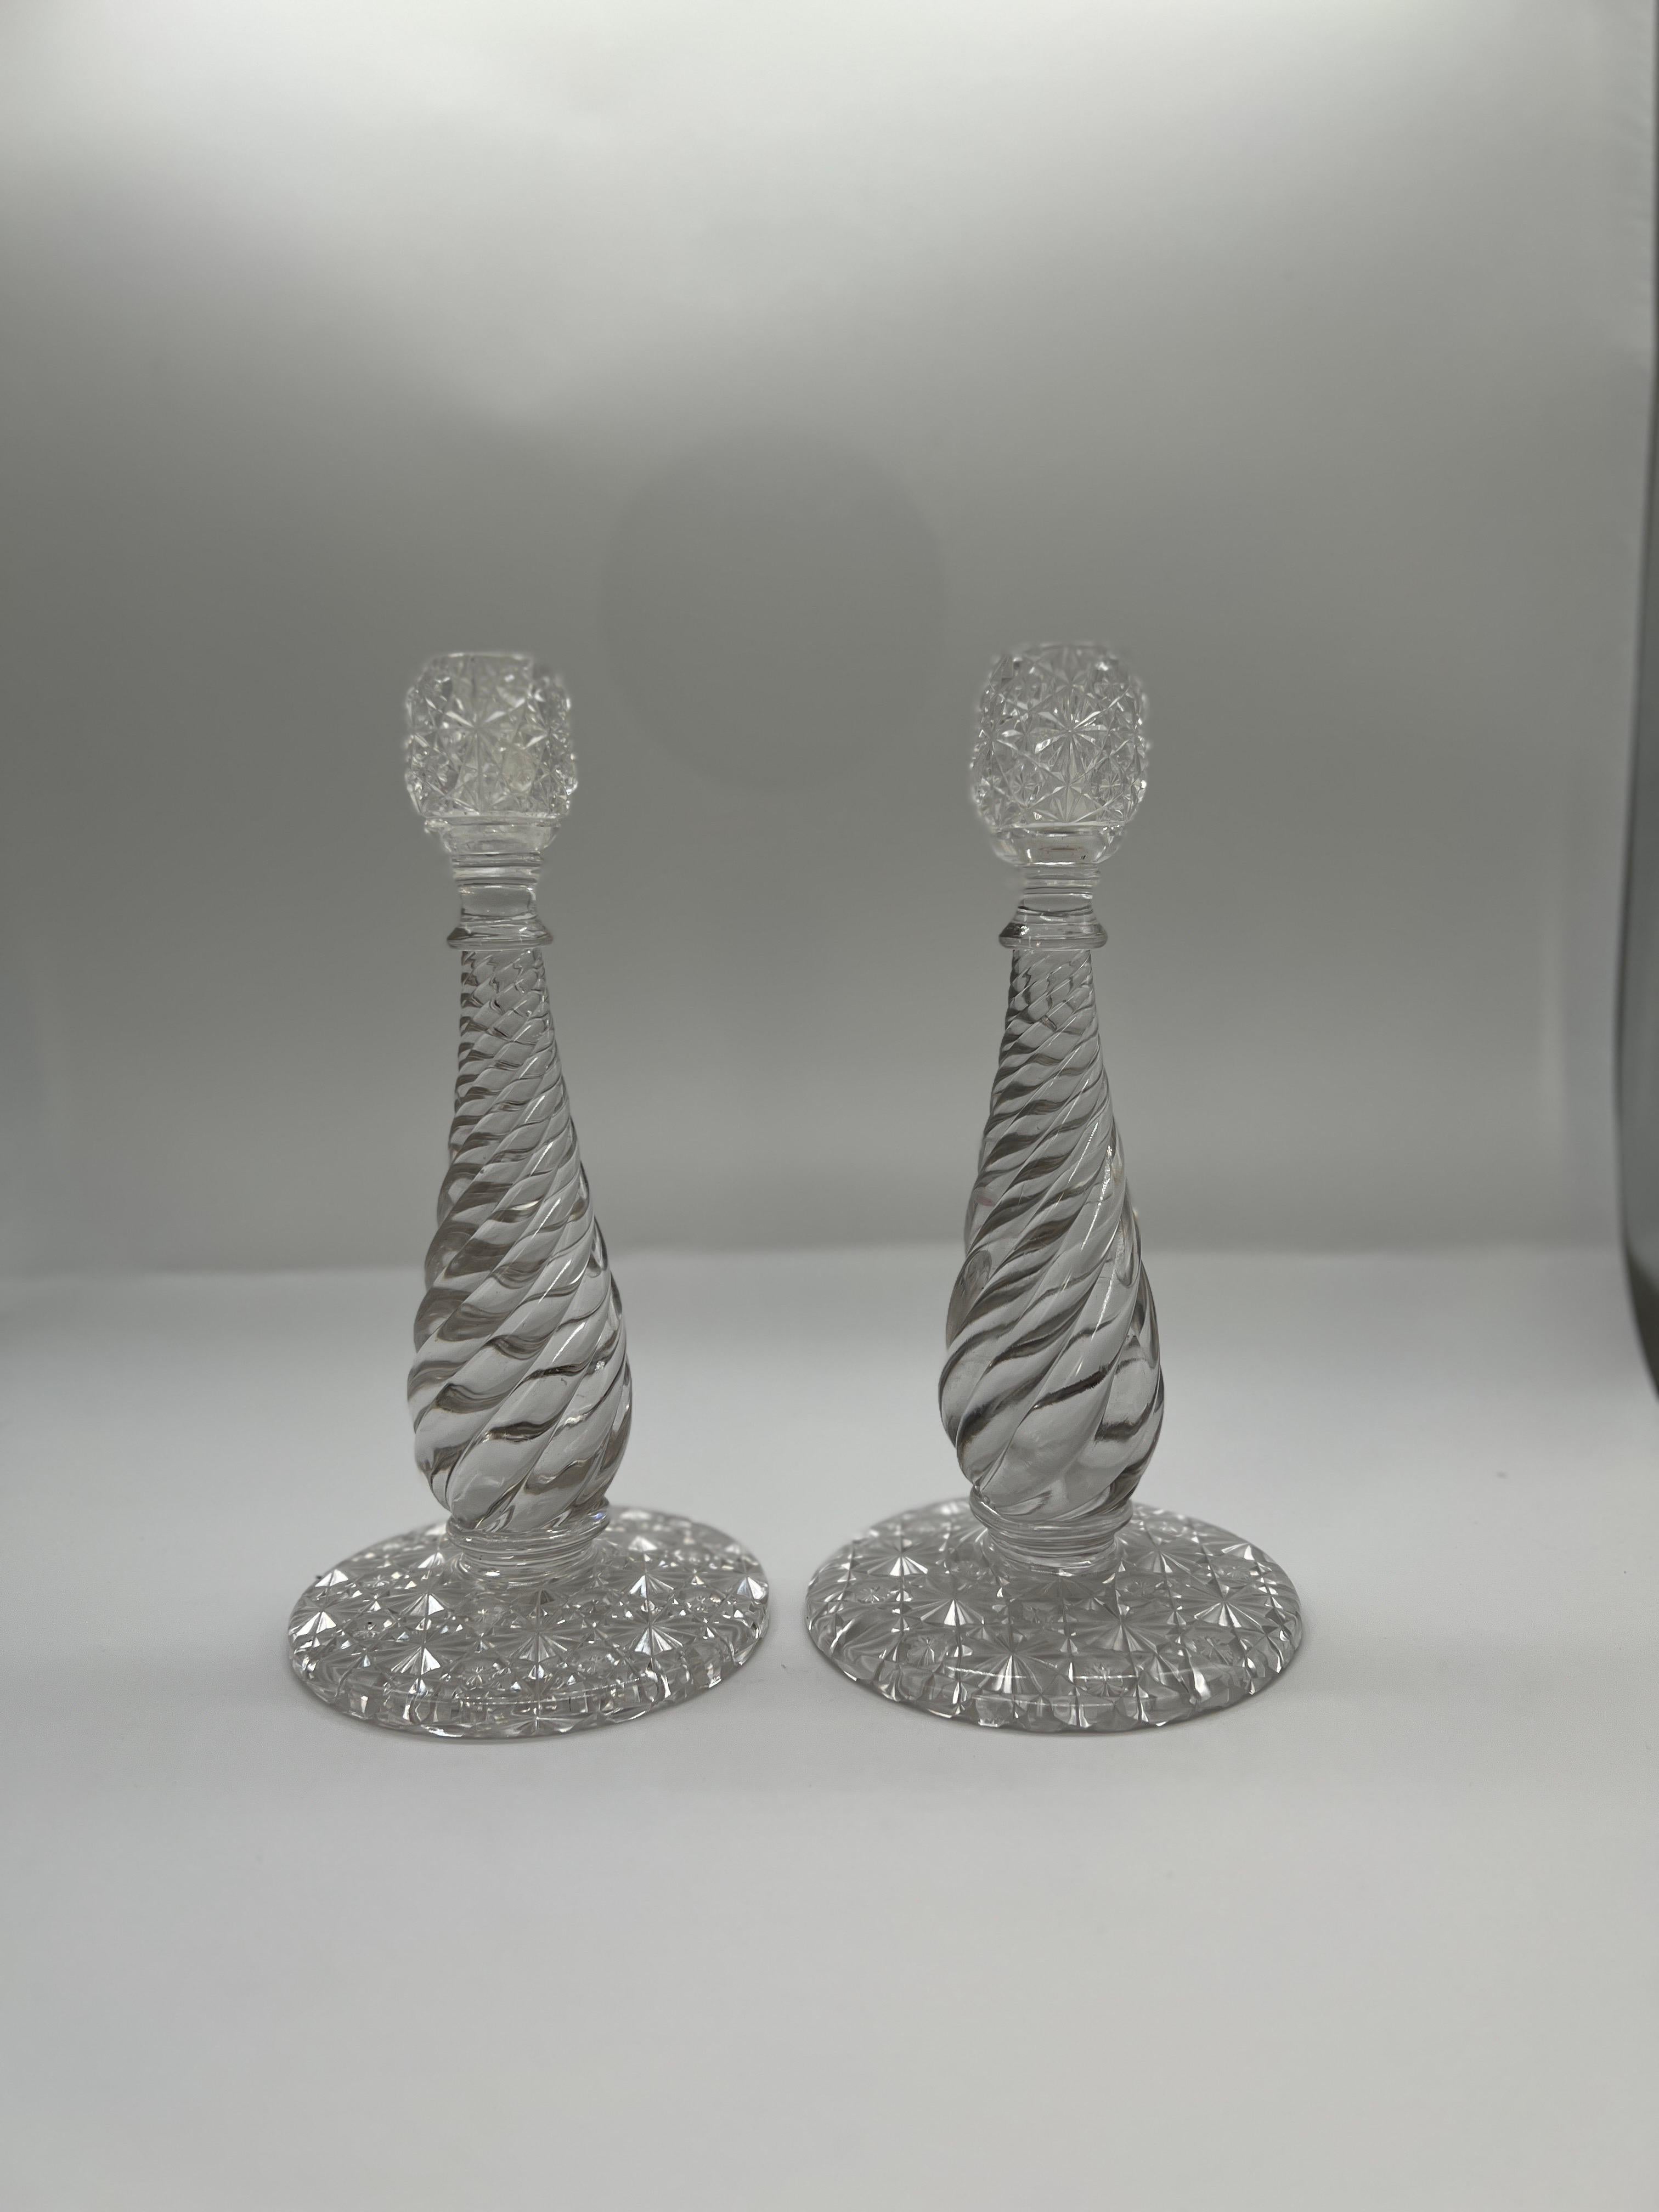 American, 19th century.

A pair of fine quality antique American Brilliant Period Cut Glass candlesticks in the RARE Russian and Swirl patterns. Each with an incredibly deep cut with stars and strawberry diamonds. 
Each accompanied with